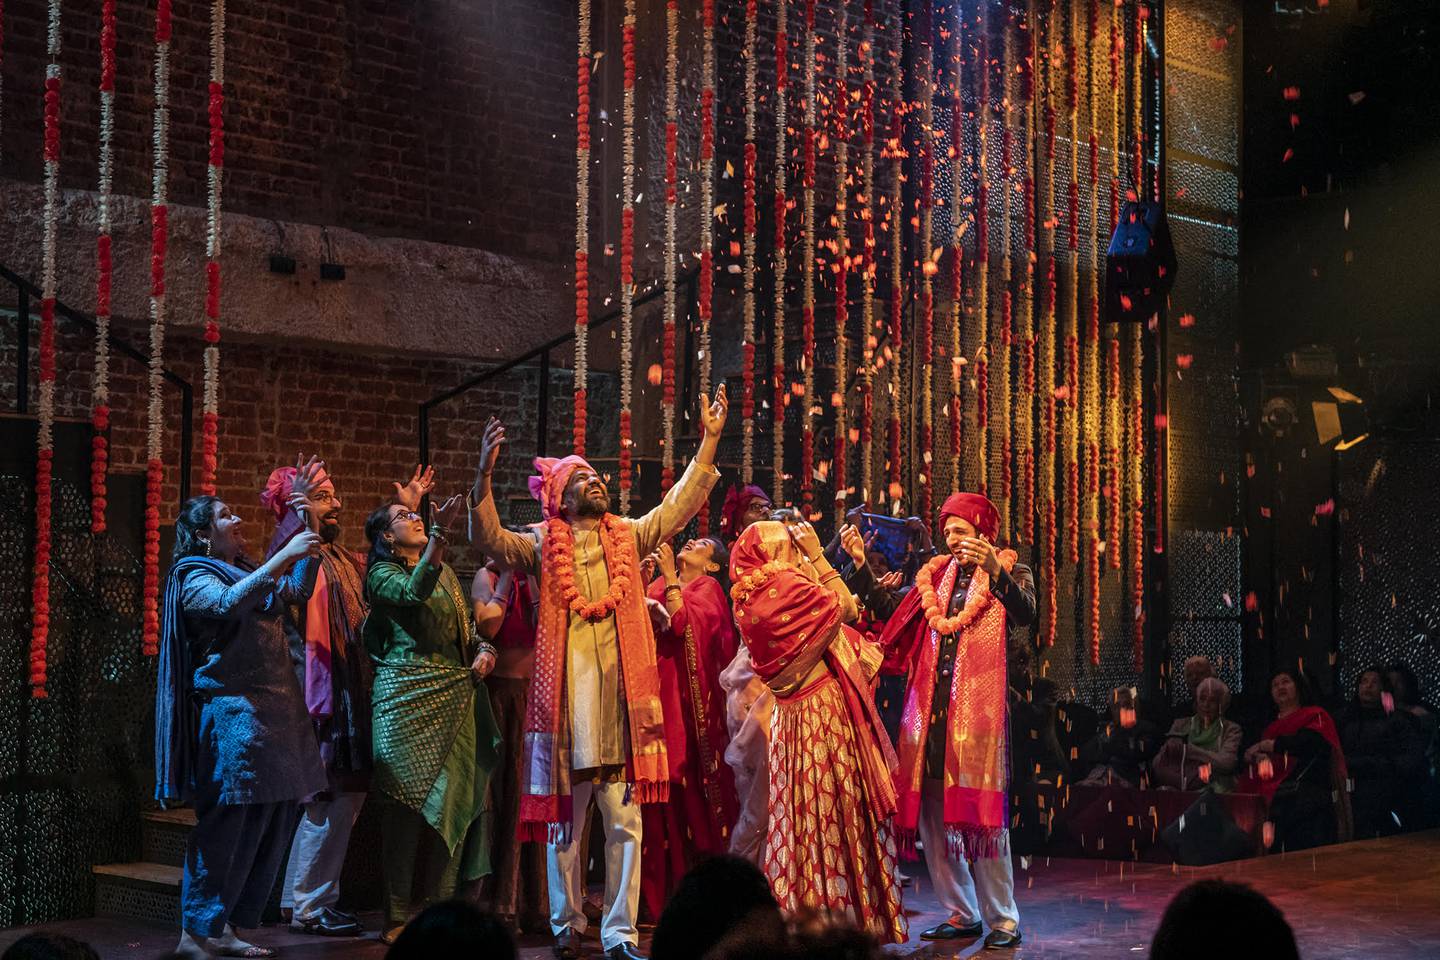 'Monsoon Wedding the Musical' will channel the spirit of the hit 2001 film. Photo: Qatar Creates